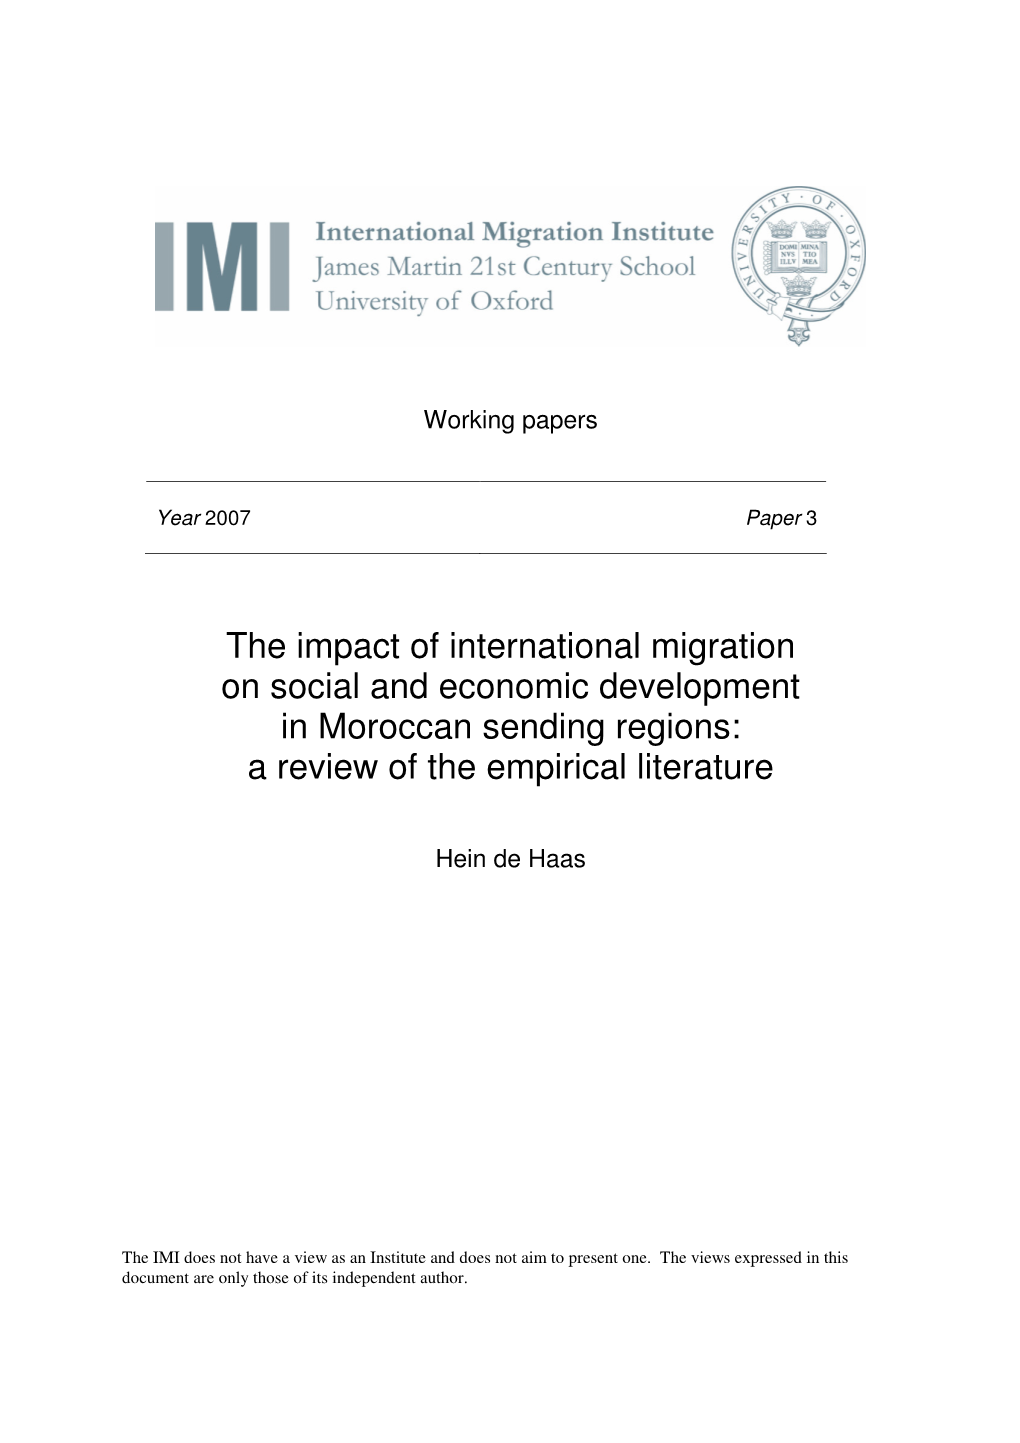 The Impact of International Migration on Social and Economic Development in Moroccan Sending Regions: a Review of the Empirical Literature